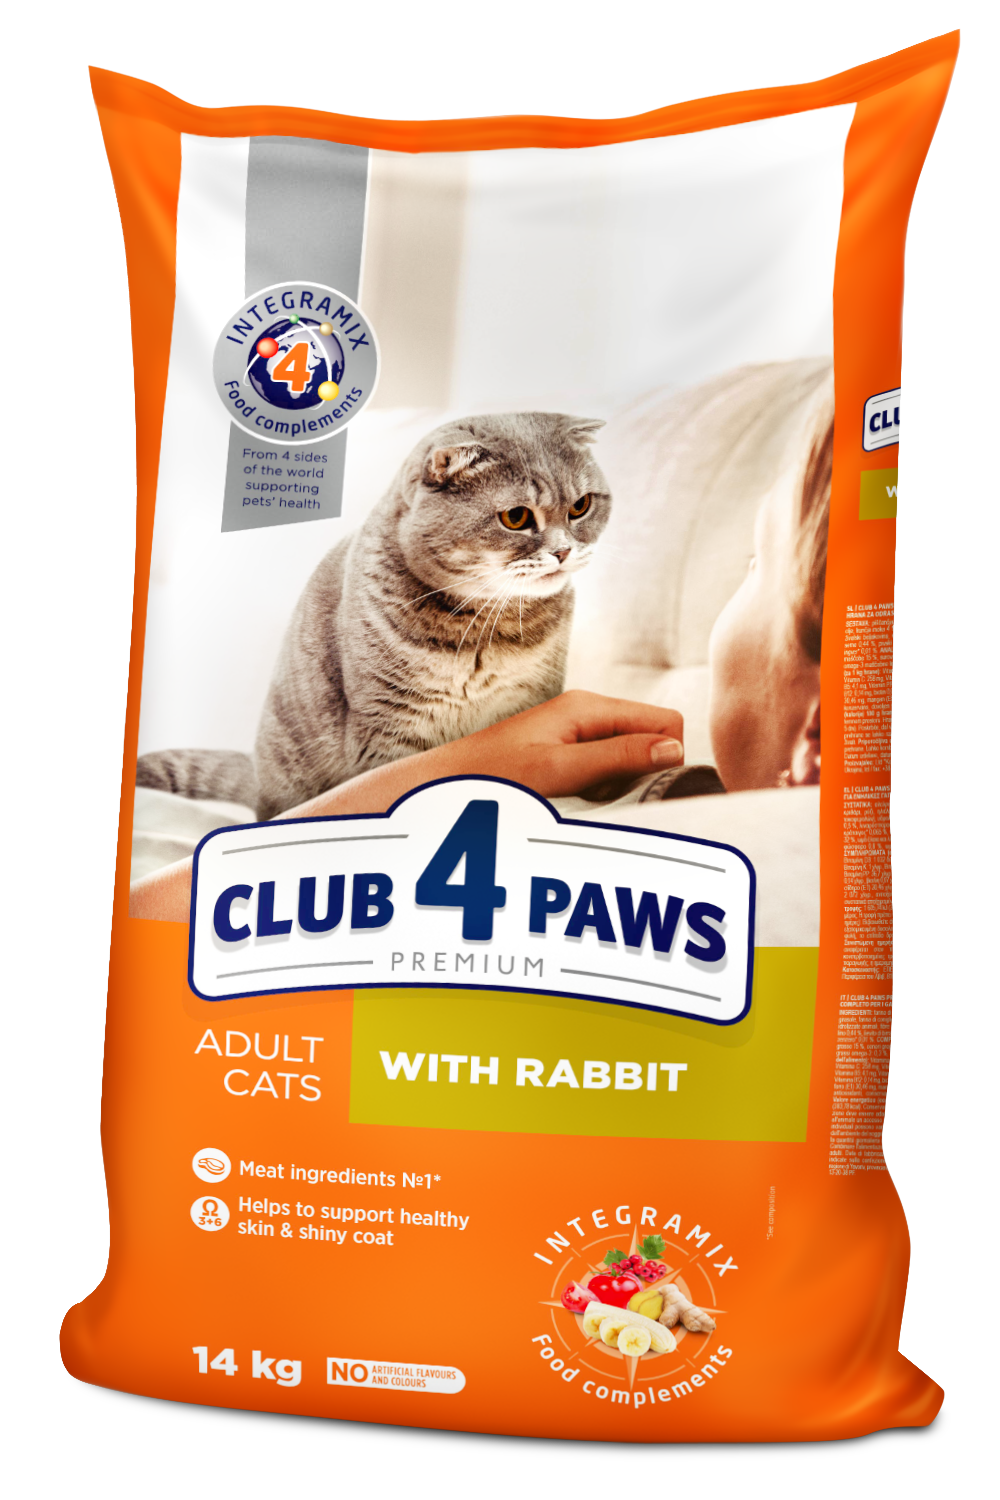 CLUB 4 PAWS Premium with Rabbit. Complete Dry Food for Adult Cats